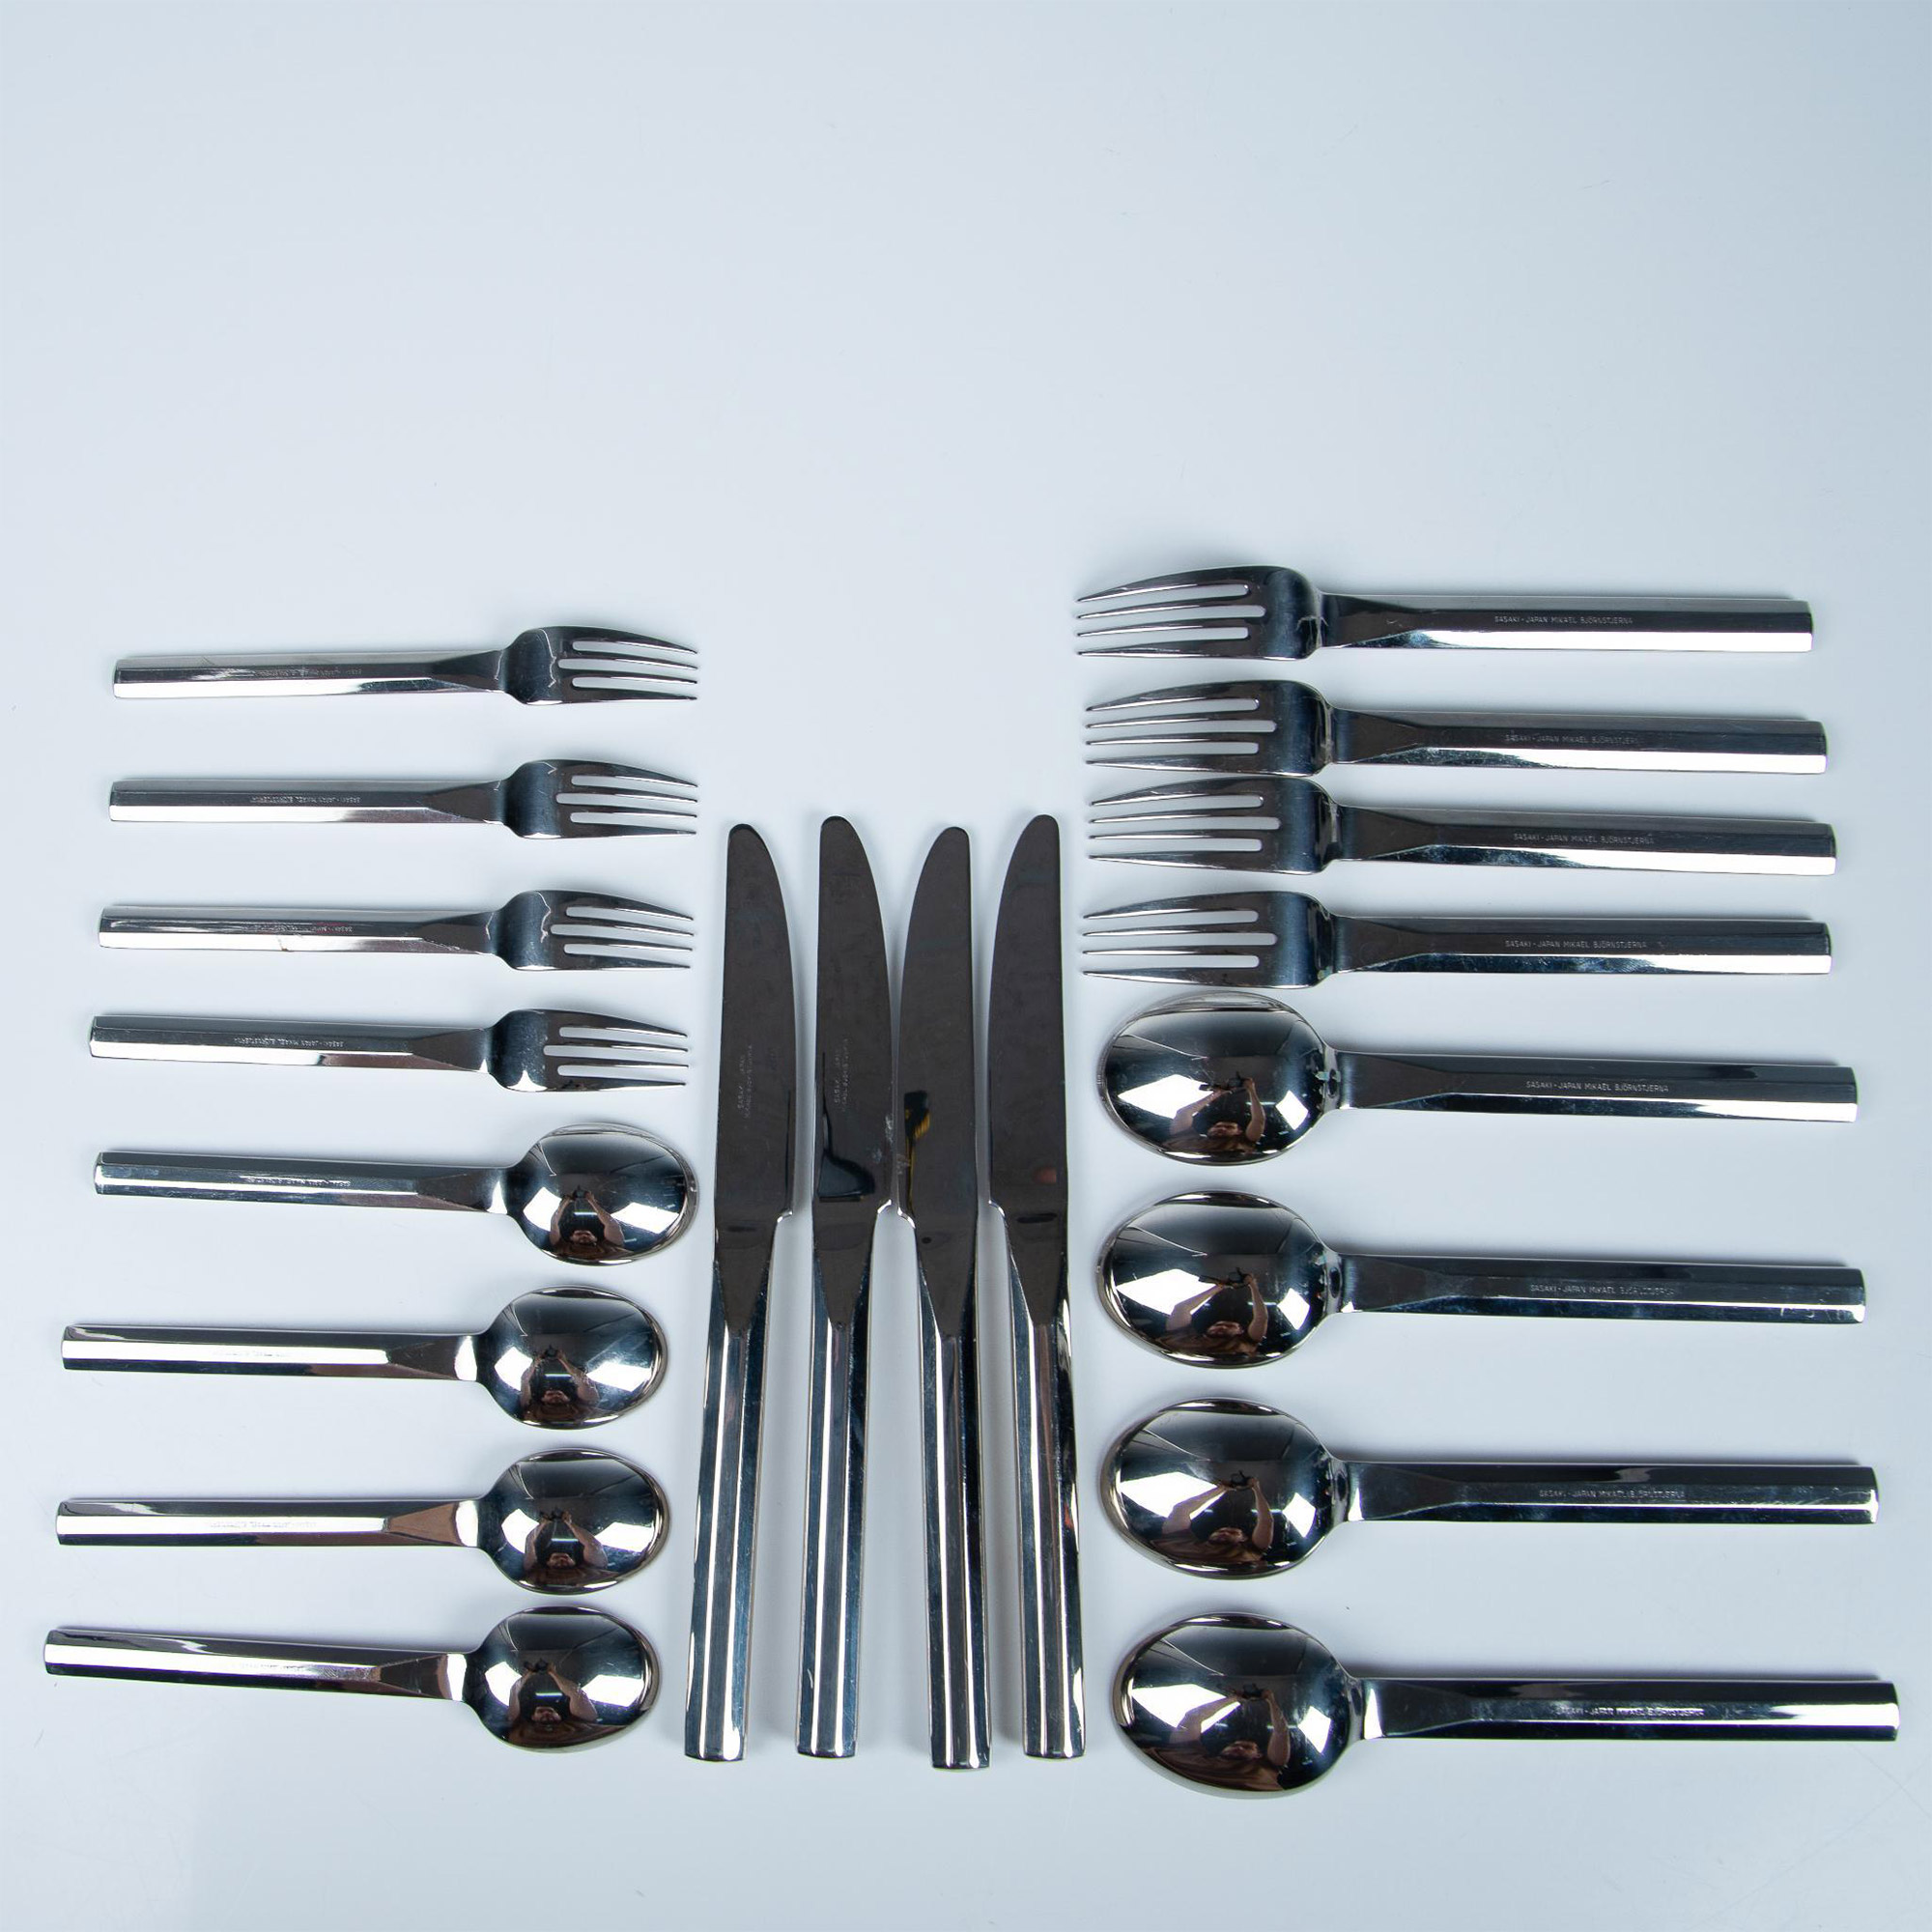 20pc Sasaki Stainless Steel Flatware Set, Service for 4 - Image 12 of 12